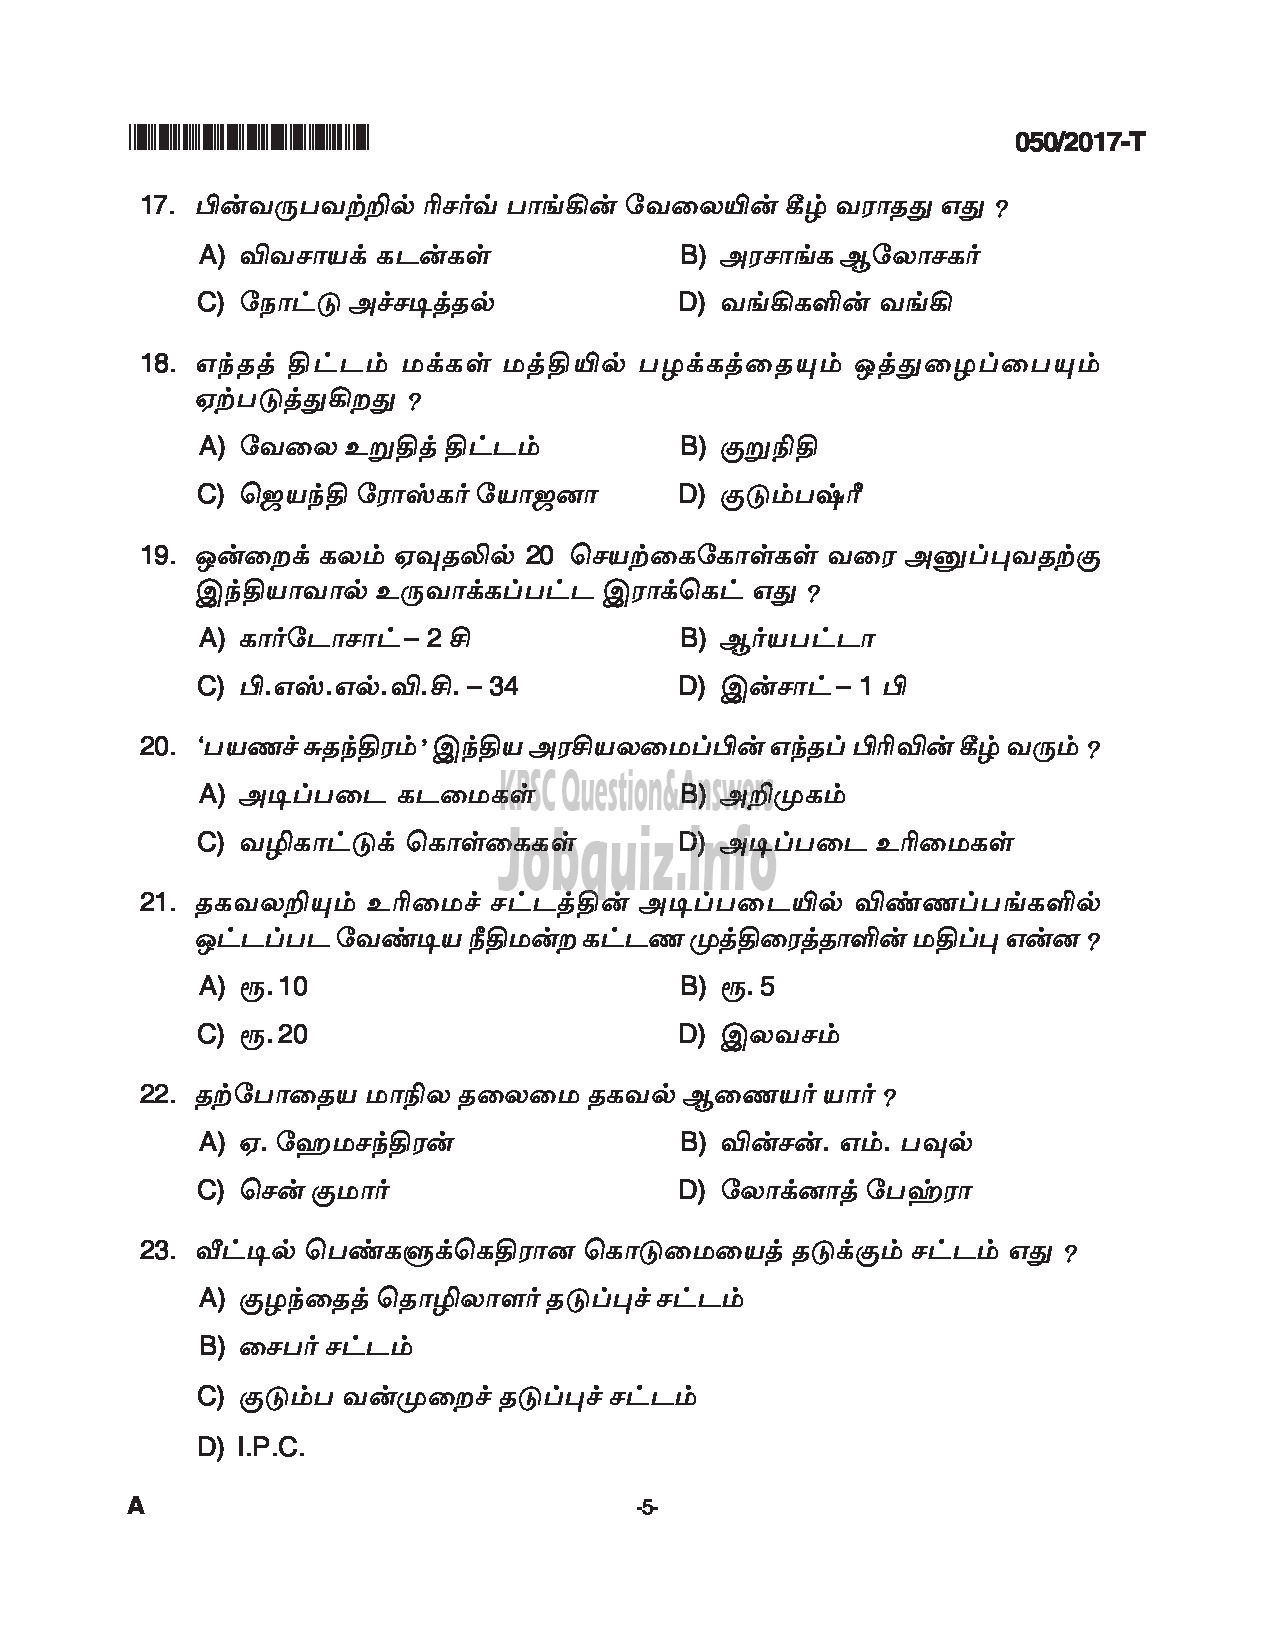 Kerala PSC Question Paper - LDC SR FOR SC/ST, SR FROM DIFFERENTLY ABLED CANDIDATES CAT.NO 122/16, 413/16 QUESTION PAPER(TAMIL)-5